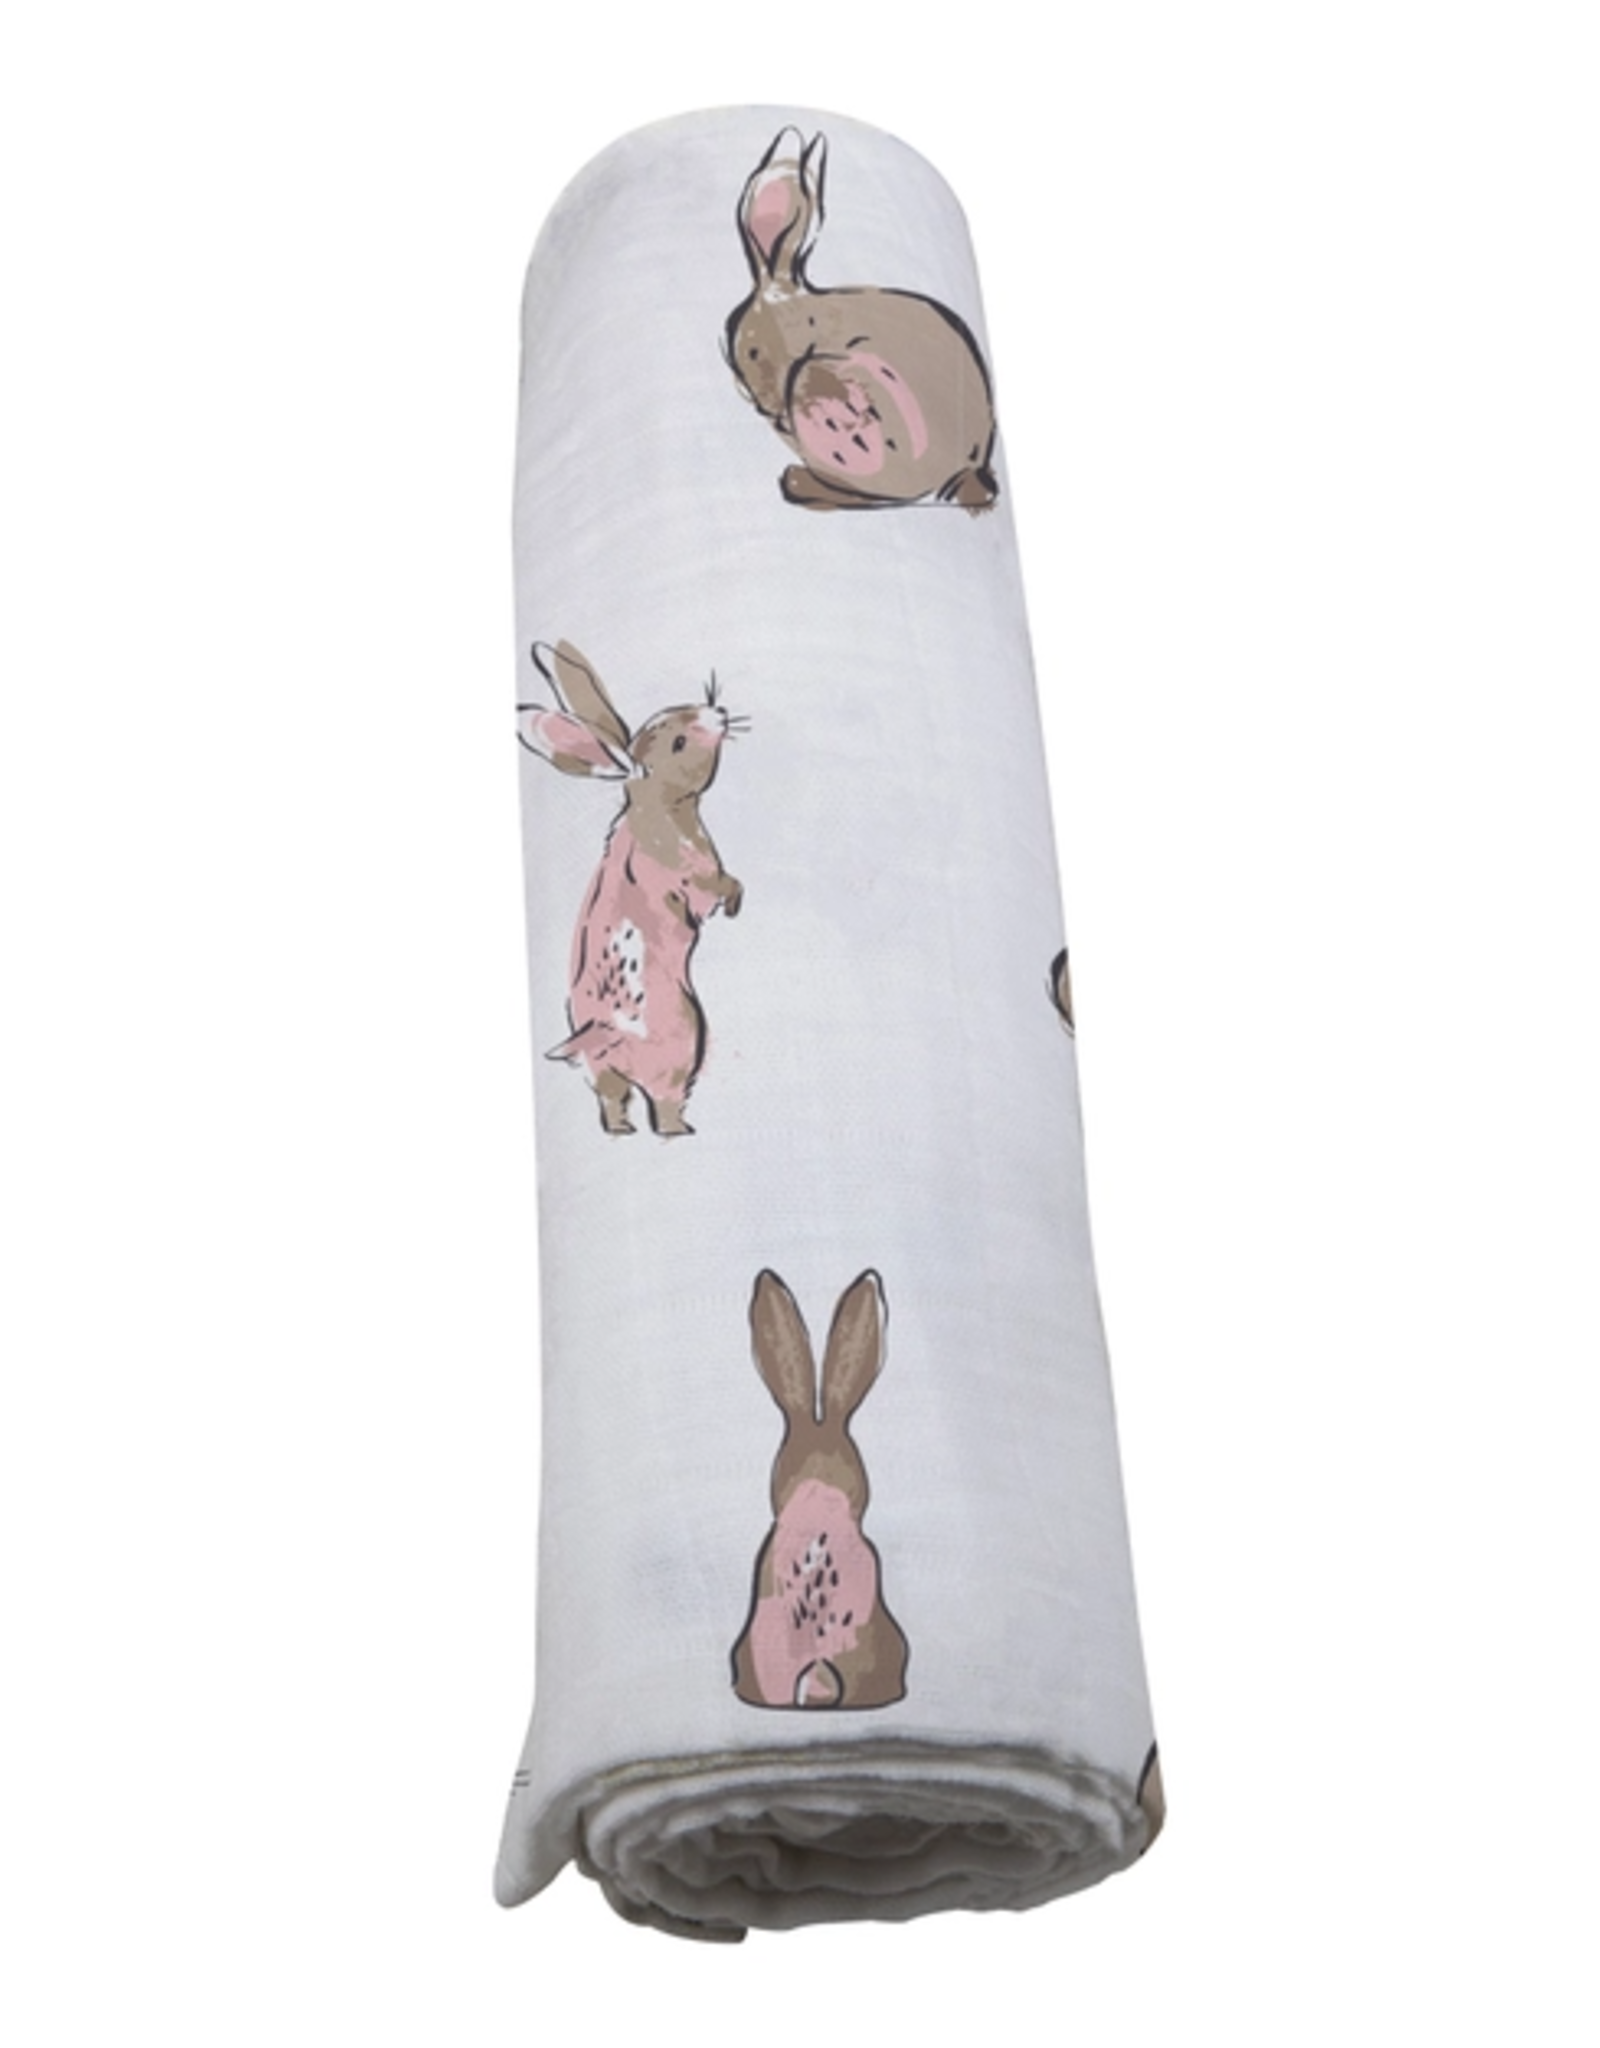 Newcastle Classics Cotton Swaddle, Pink Bunnies